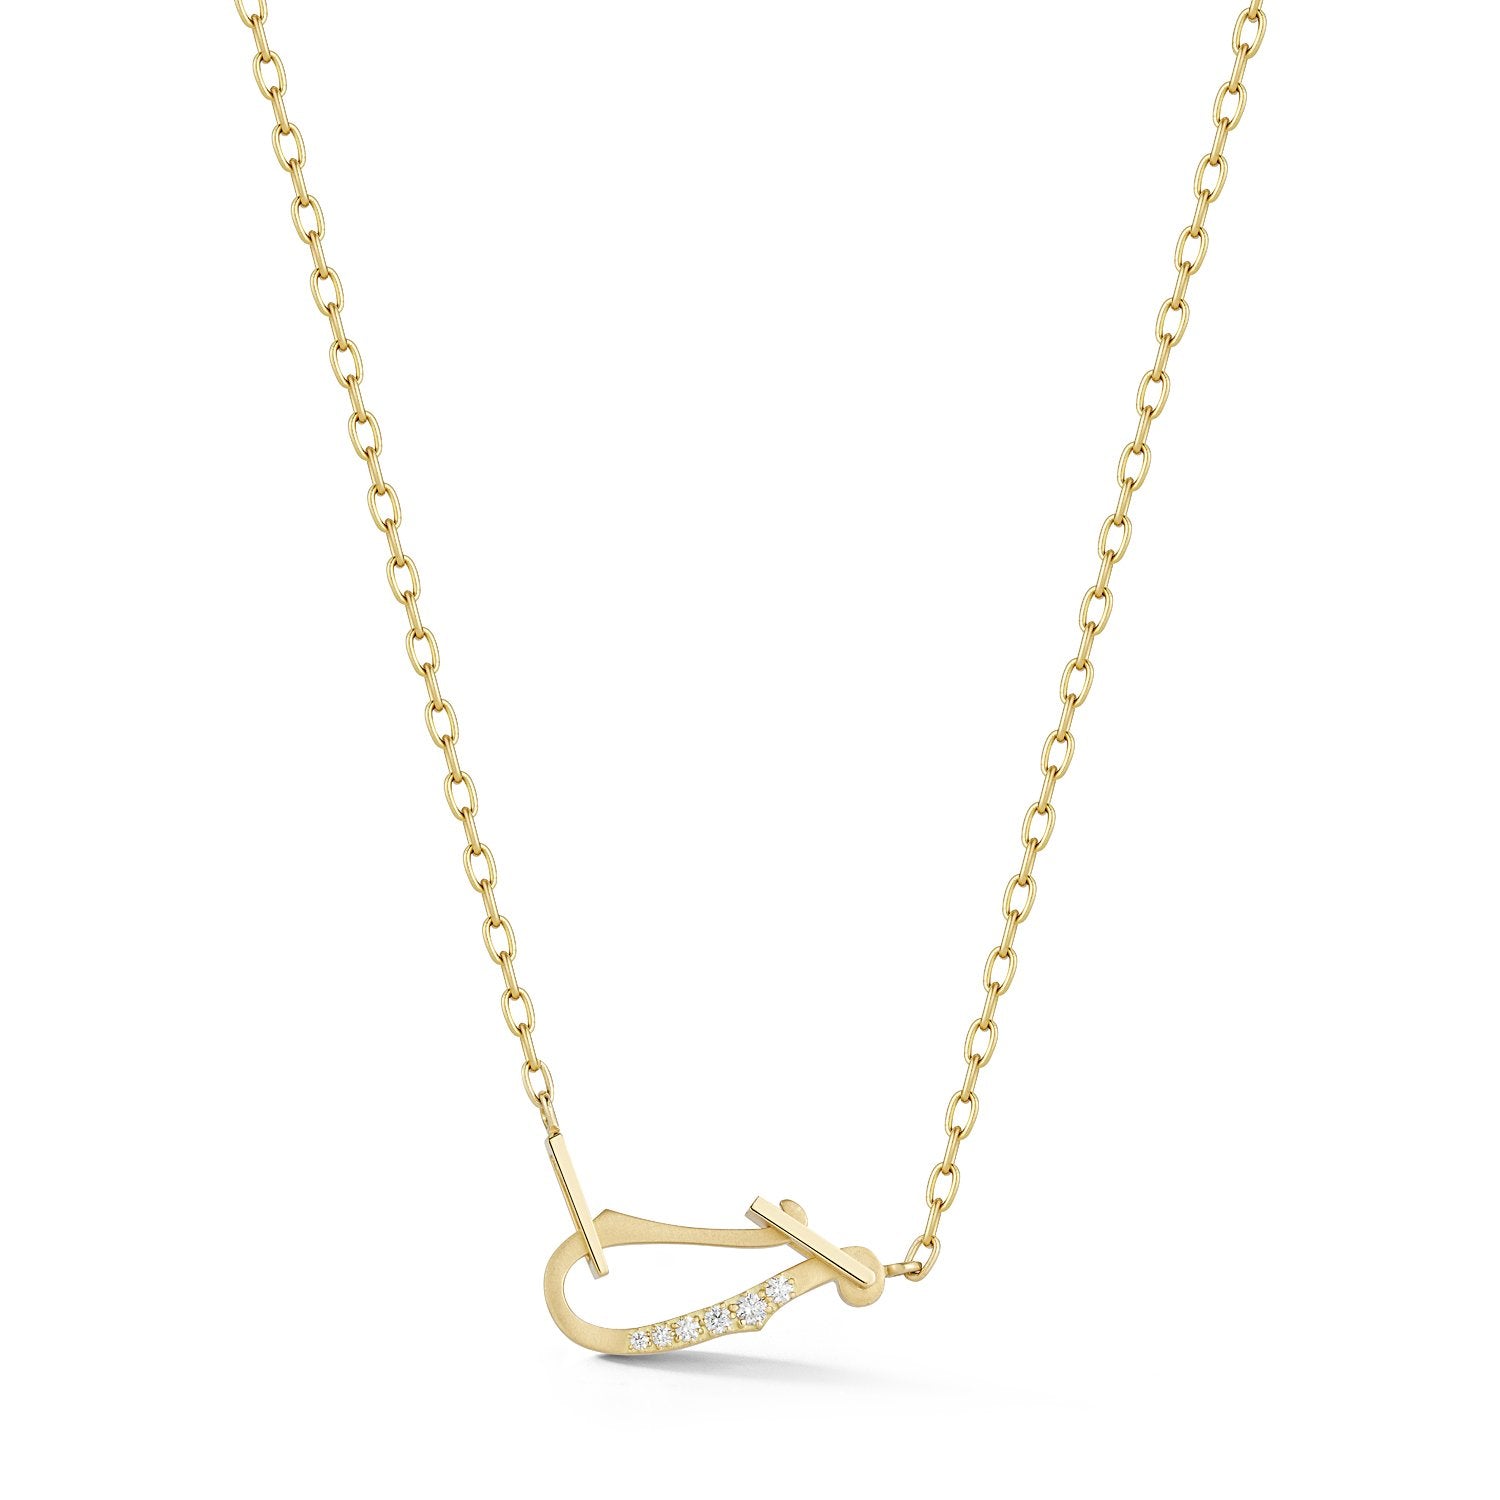 Diamond Lola Necklace in 18K Yellow Gold